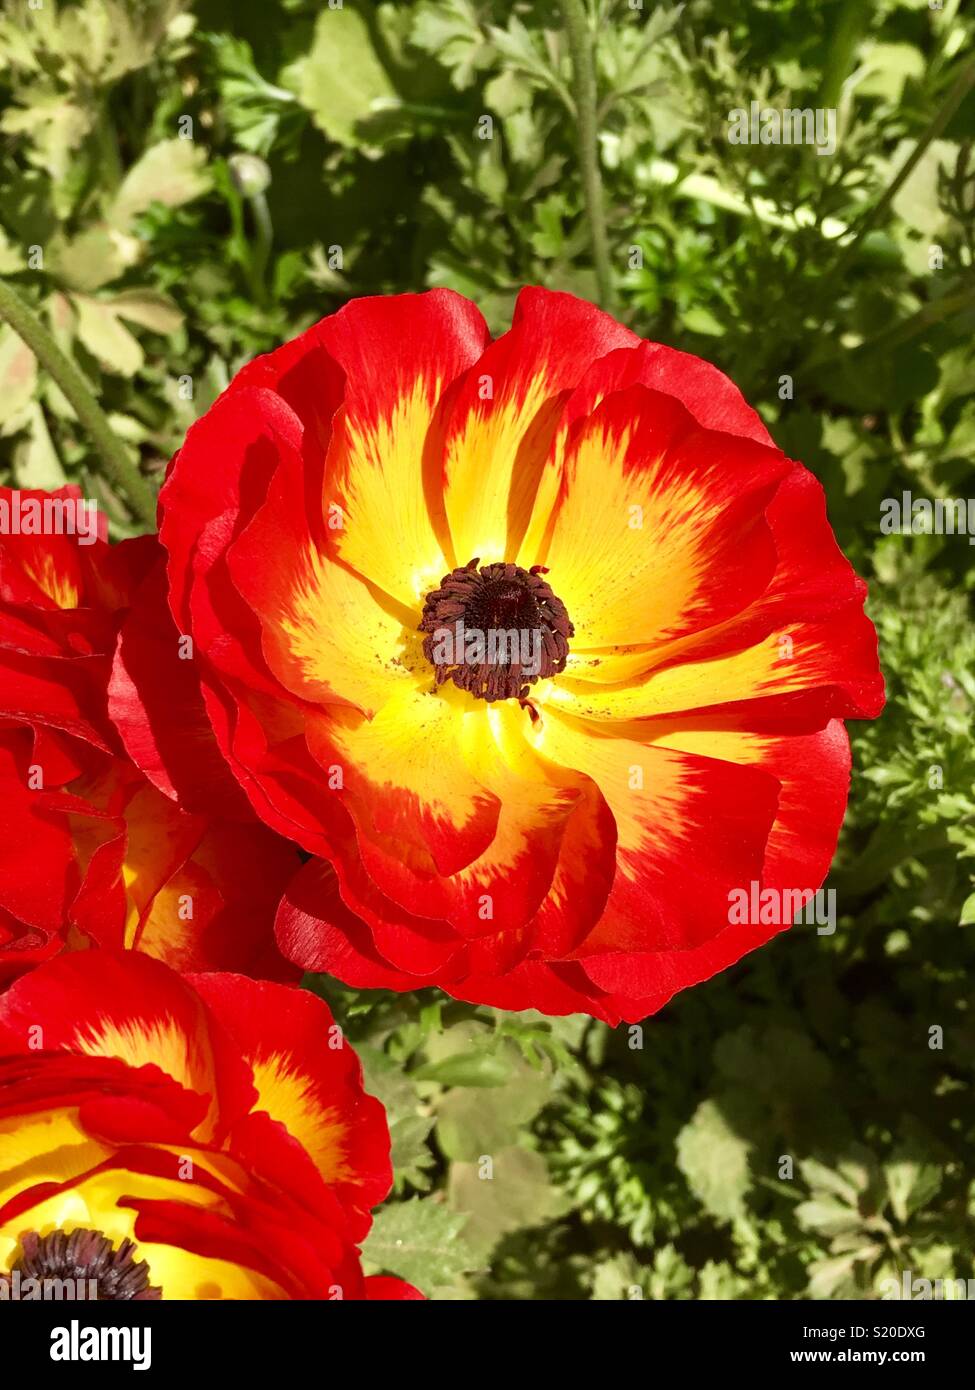 Closeup of vividly colored bright red and yellow ranunculus flower in the Carlsbad California flower field Stock Photo